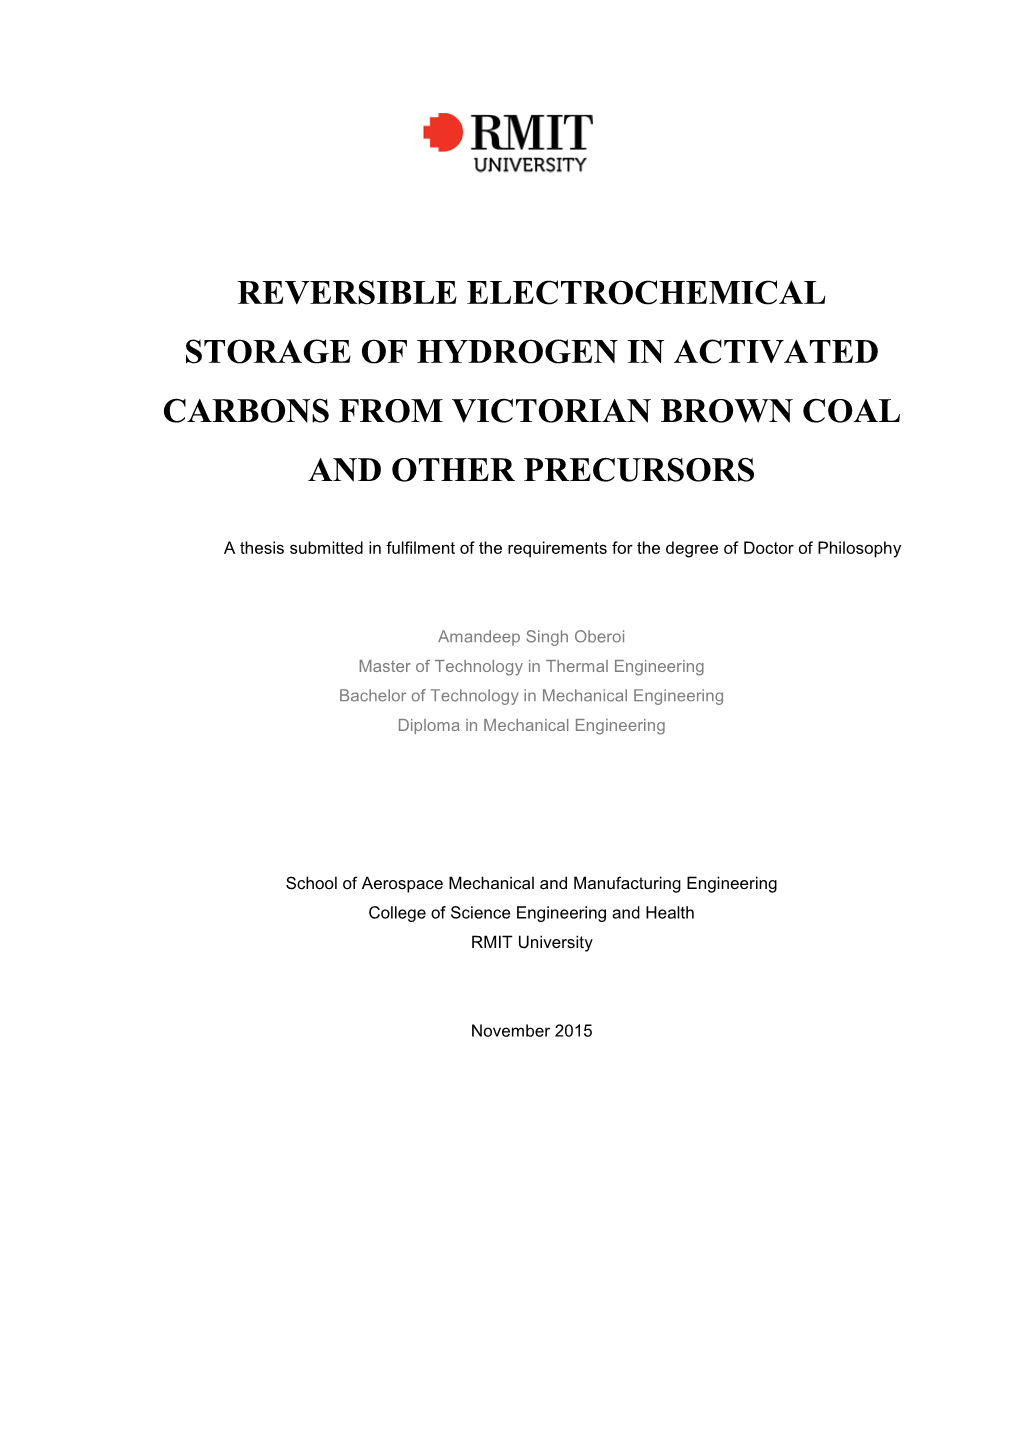 Reversible Electrochemical Storage of Hydrogen in Activated Carbons from Victorian Brown Coal